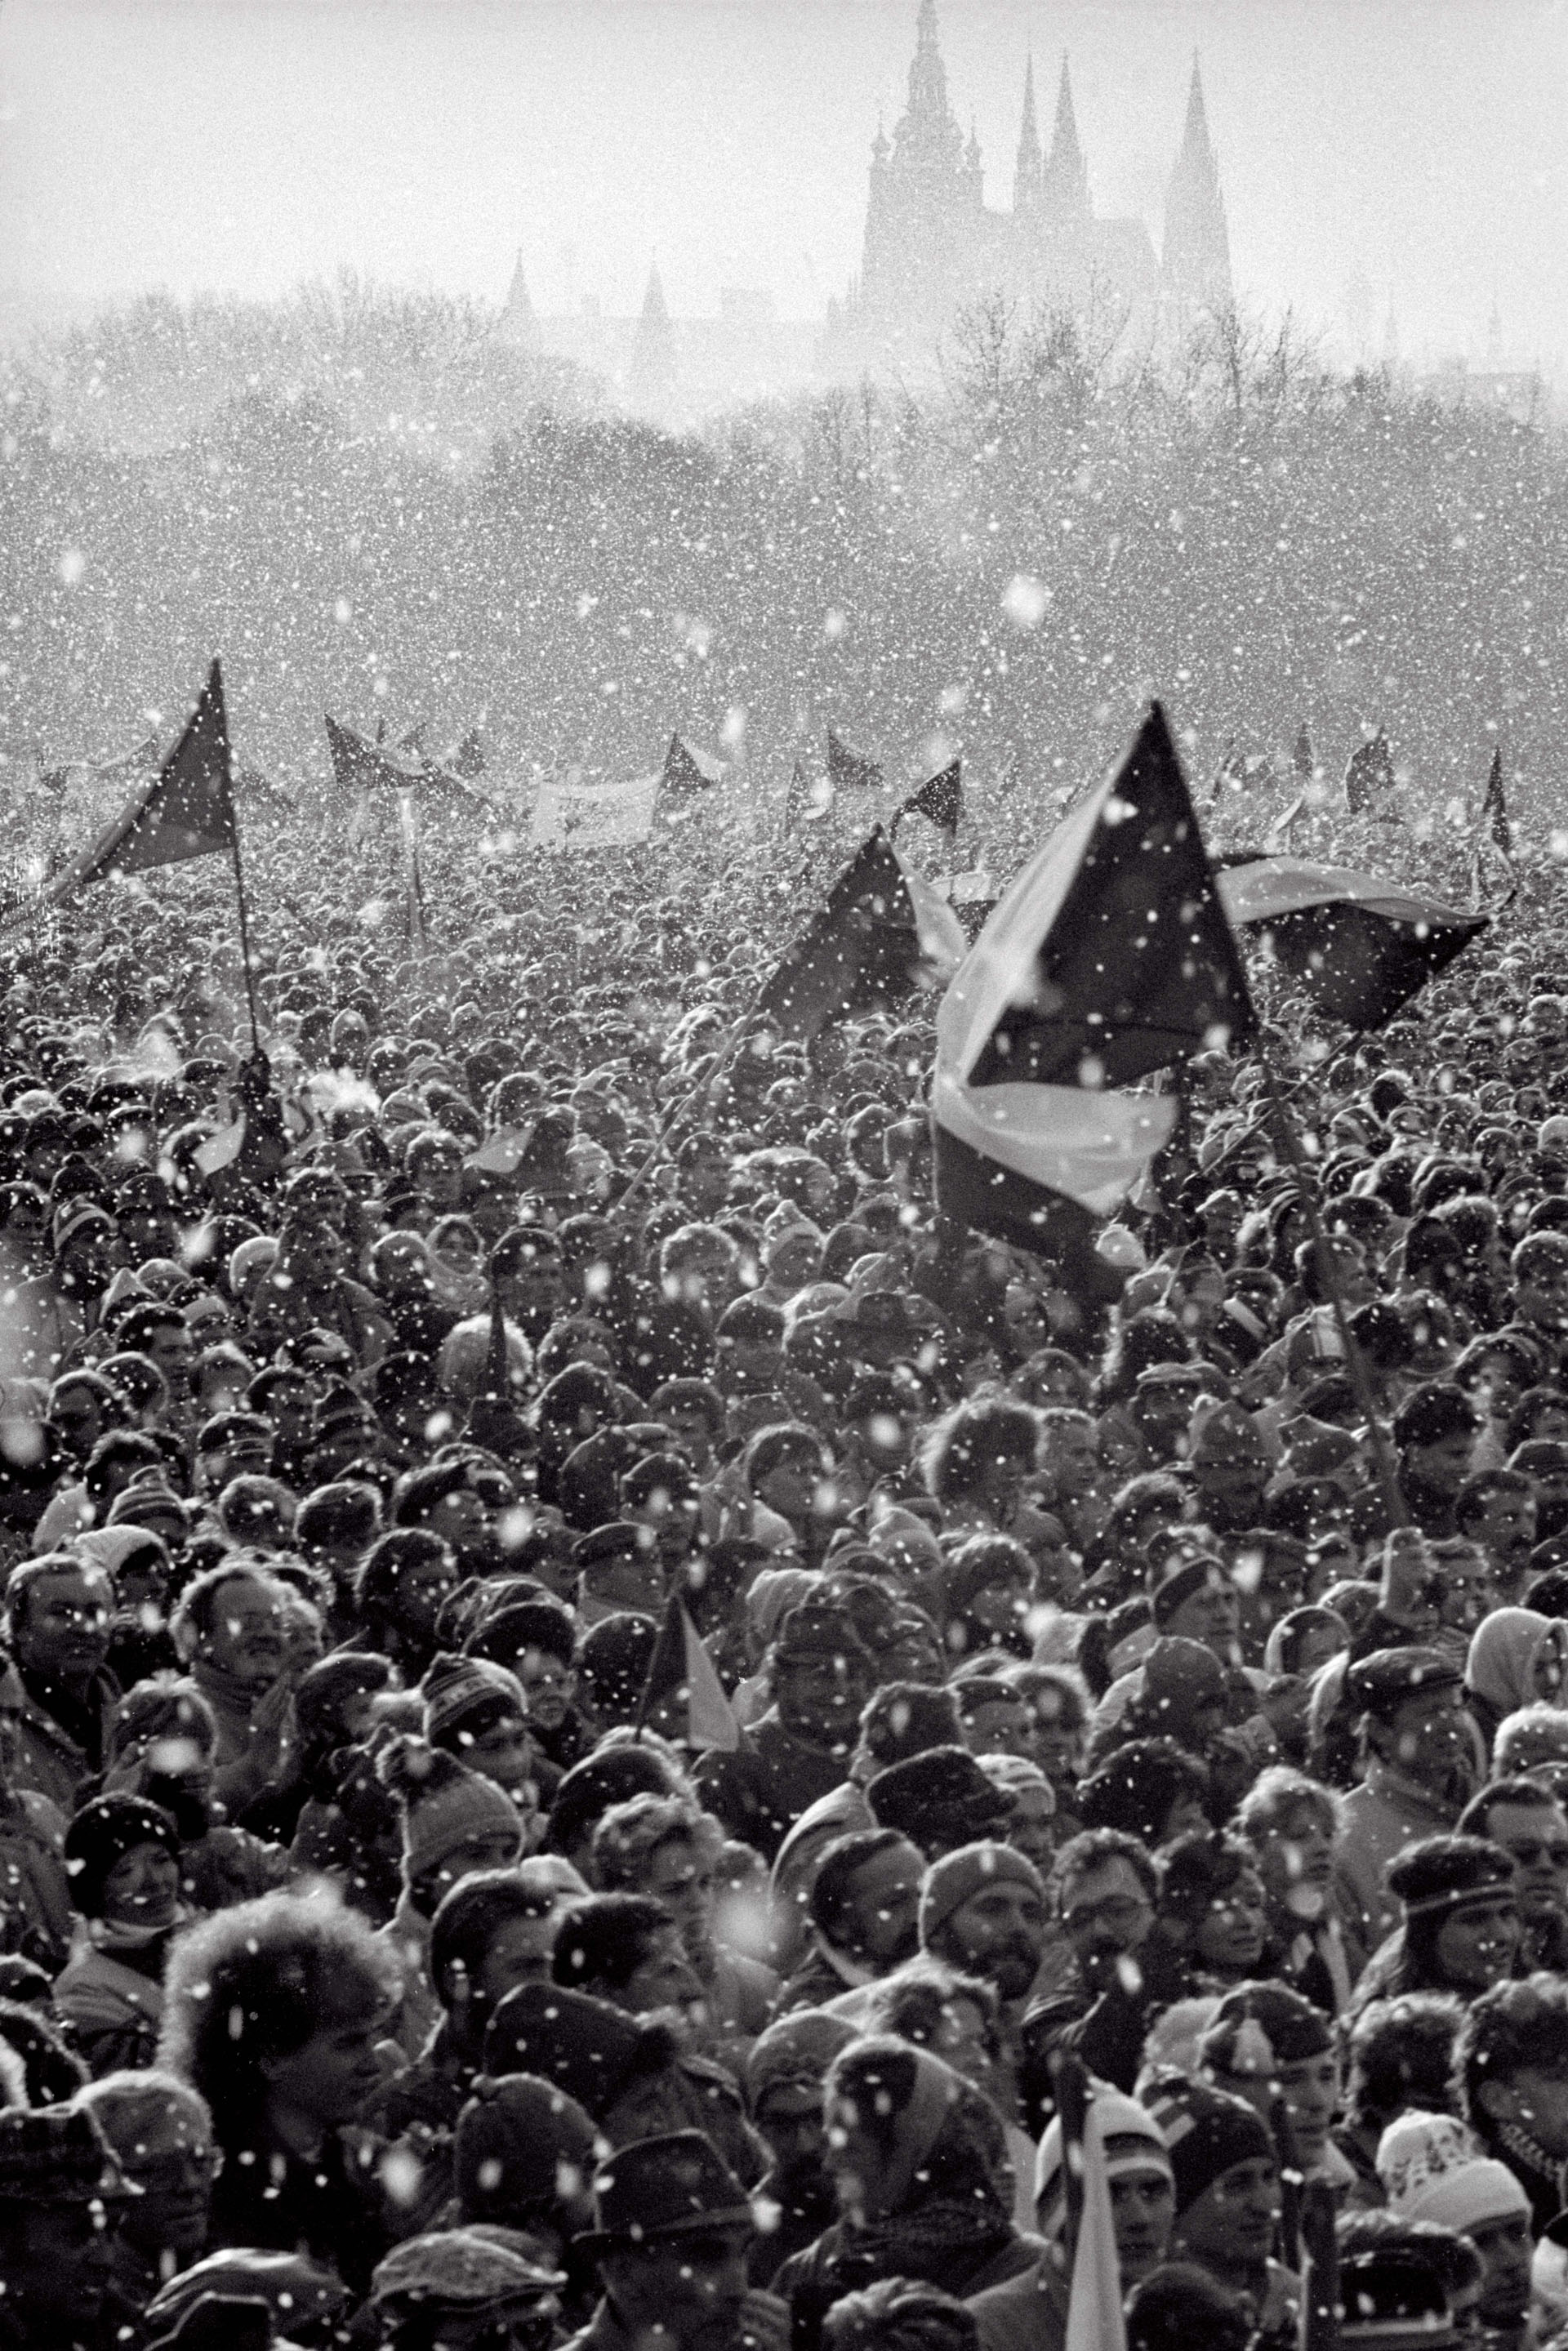 At Letná in Prague, 750,000 people marched for the establishment of democracy in the country. Prague, November 25, 1989. Image